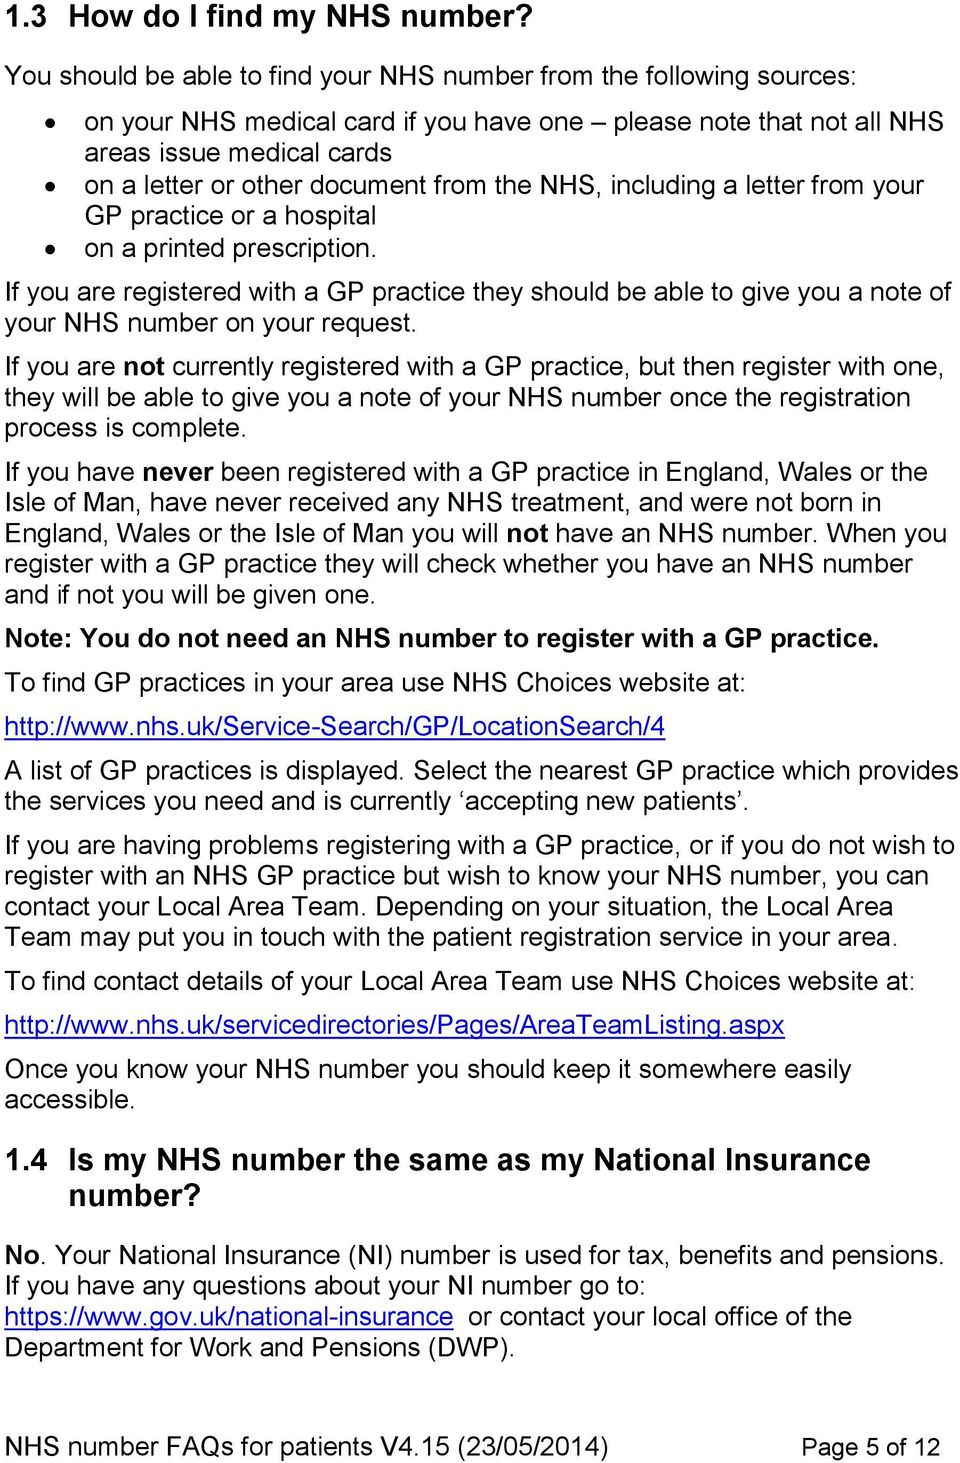 from the NHS, including a letter from your GP practice or a hospital on a printed prescription.